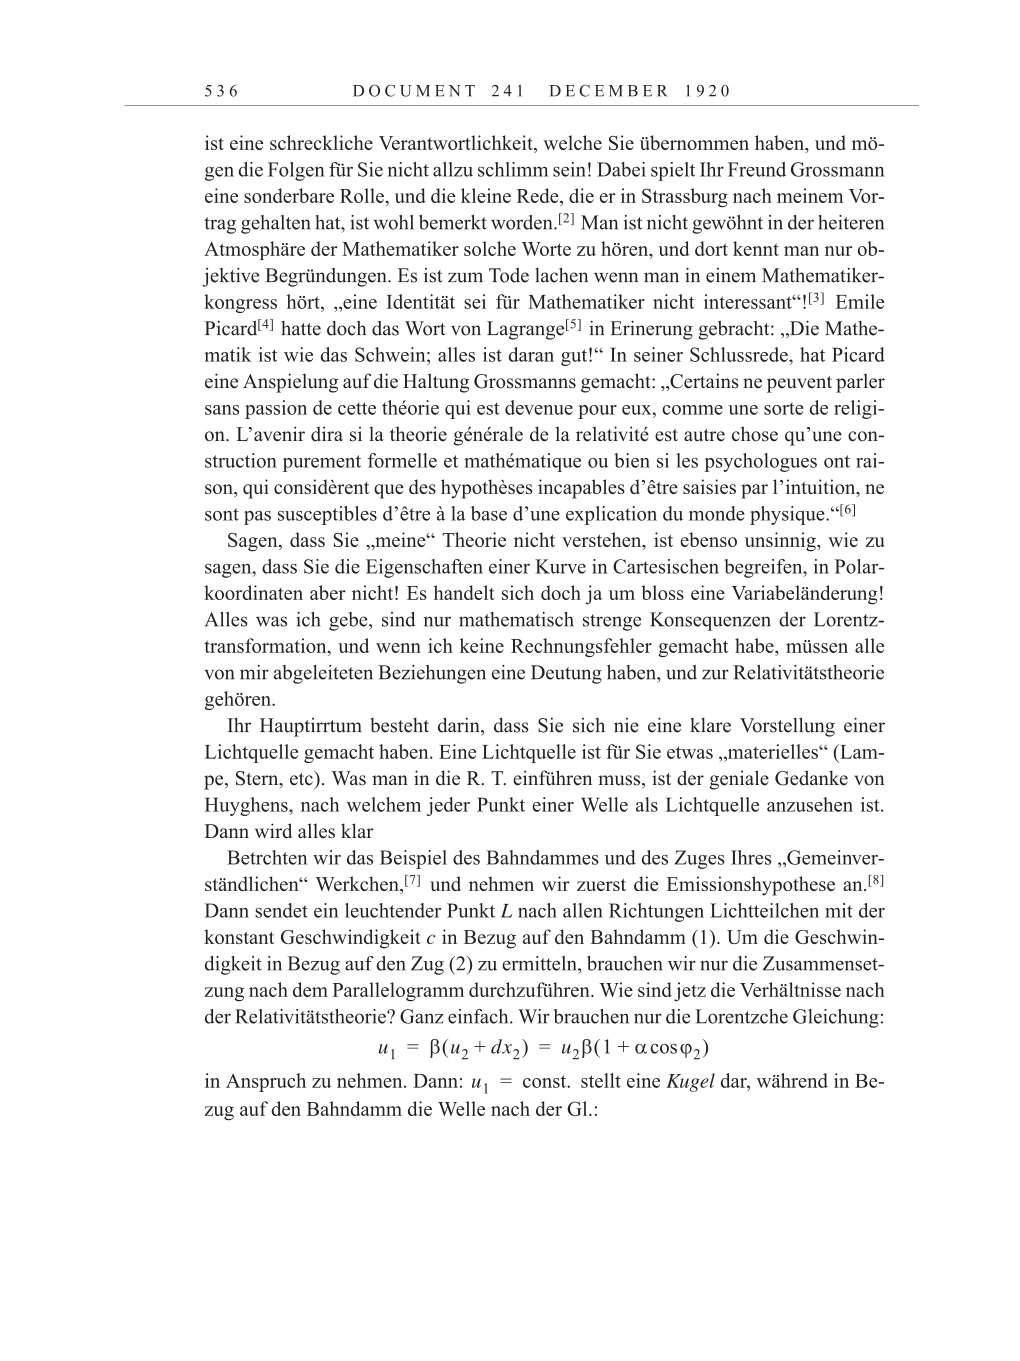 Volume 10: The Berlin Years: Correspondence May-December 1920 / Supplementary Correspondence 1909-1920 page 536